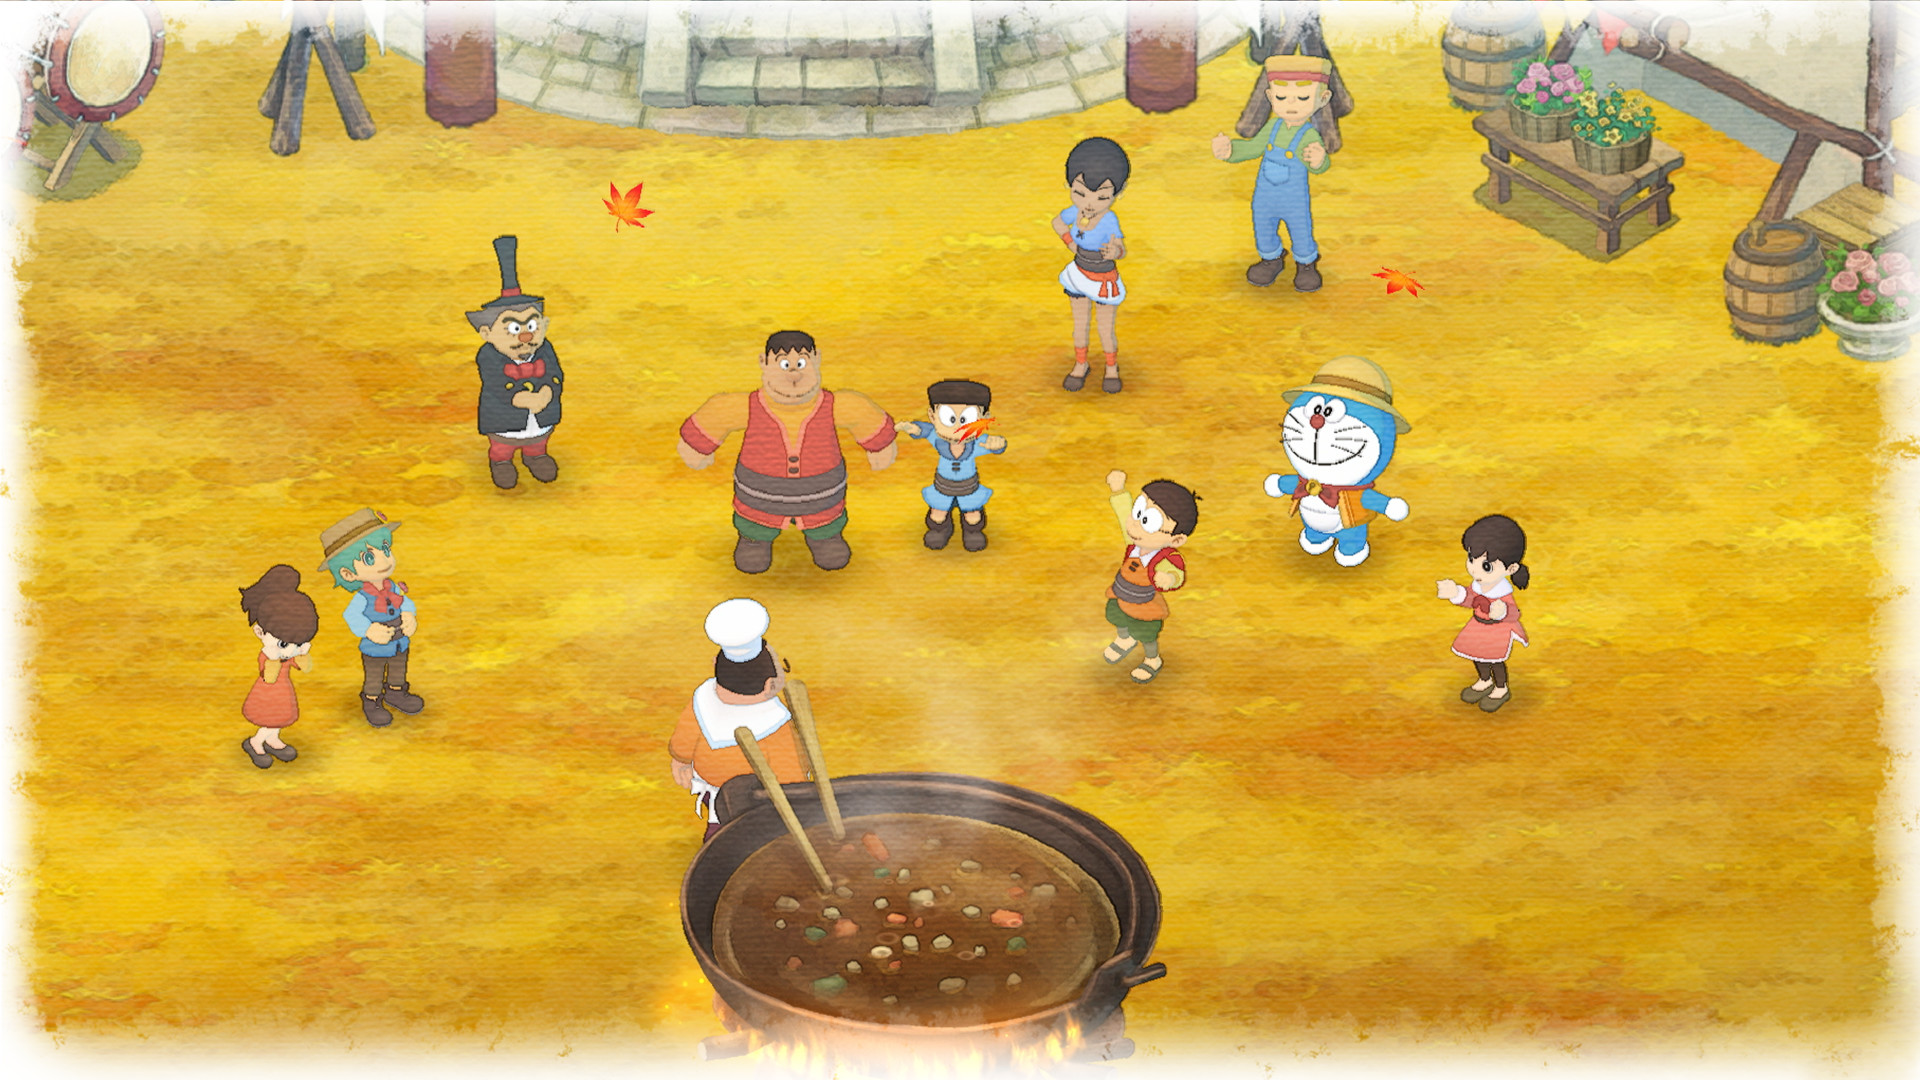 Save STORY OF SEASONS on Steam